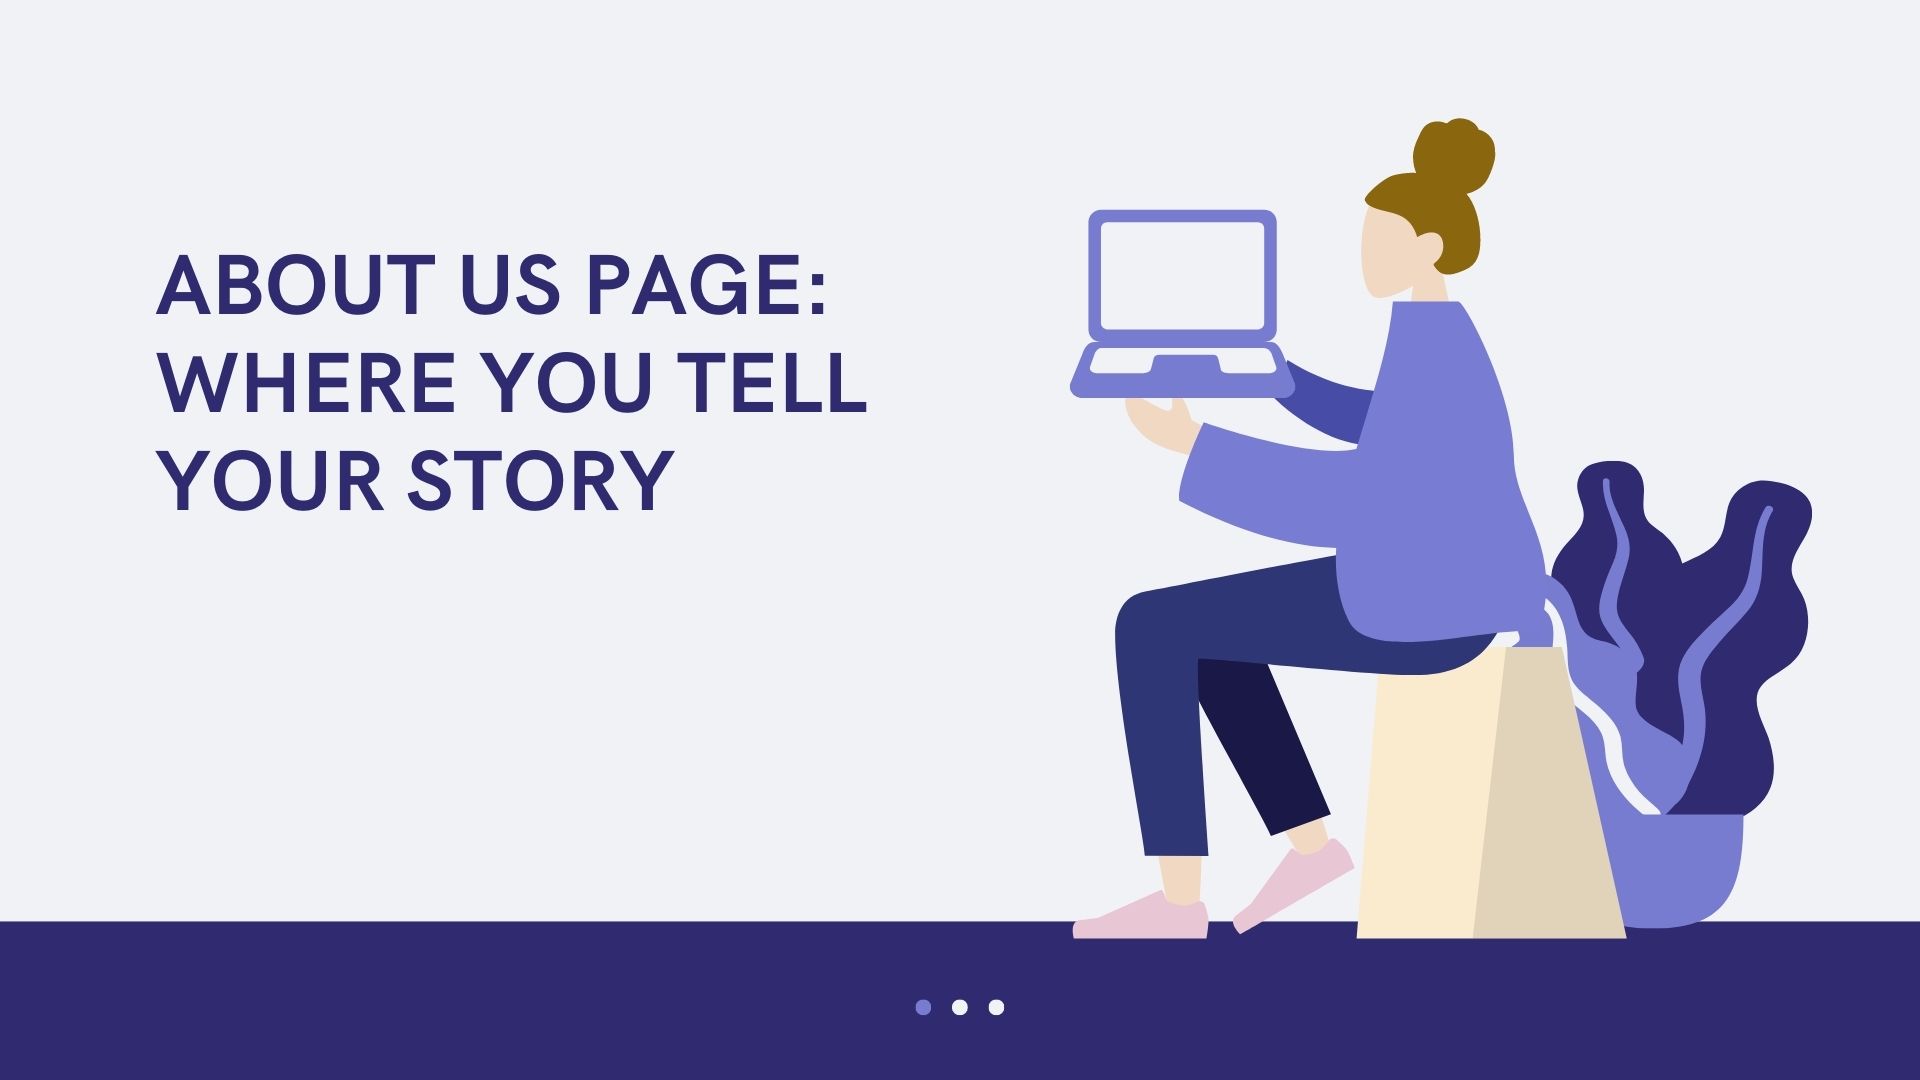 About US page is the section where you talk about yourself and why they need to engage with you